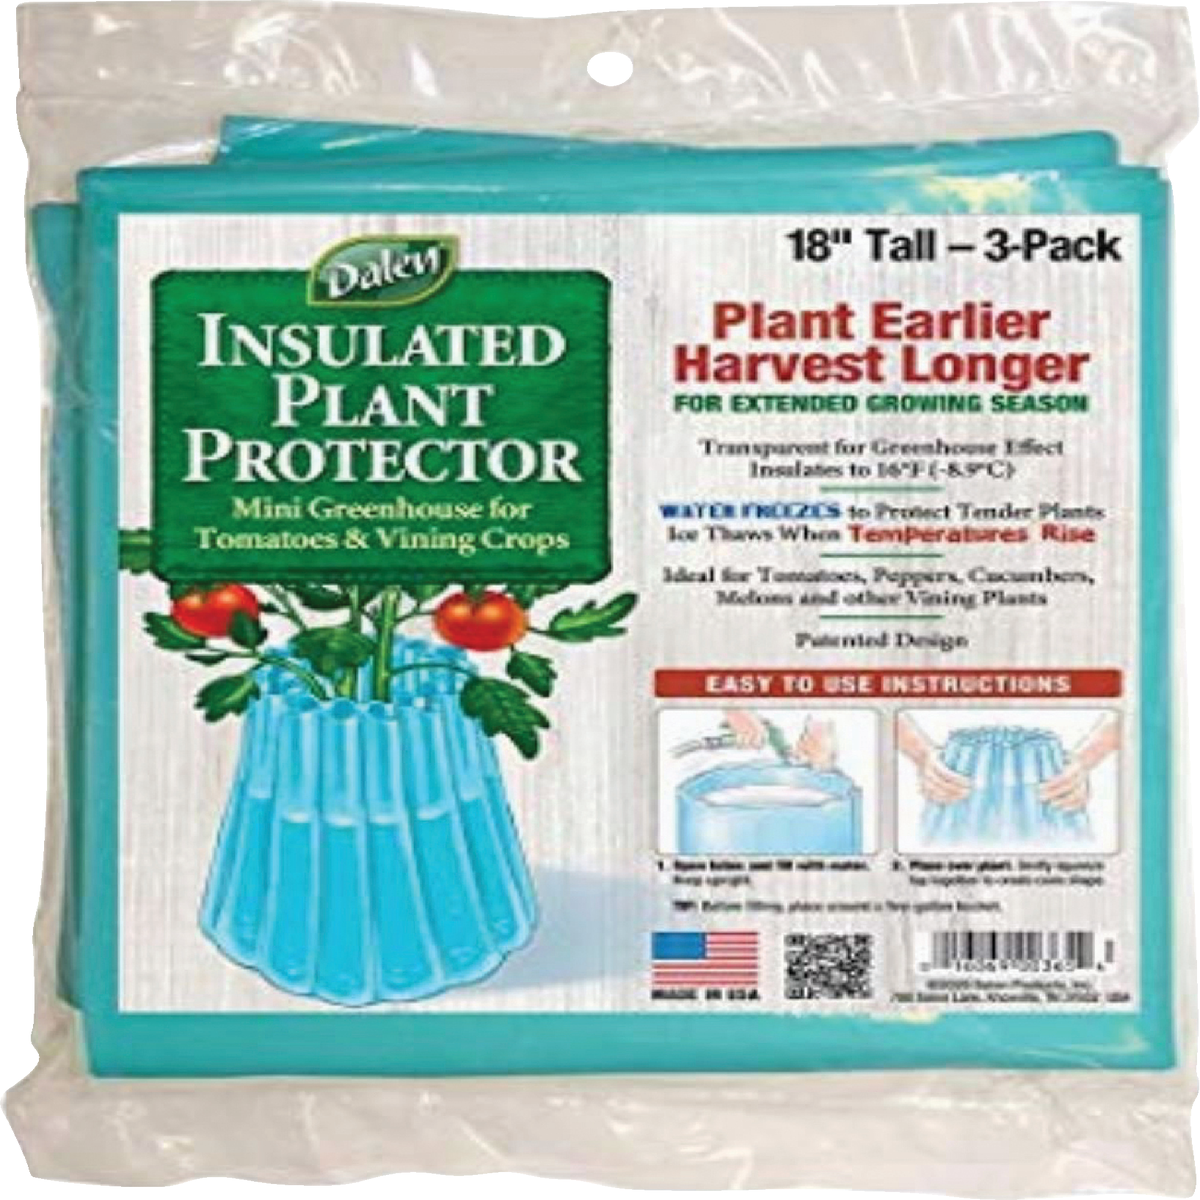 Plant Protector